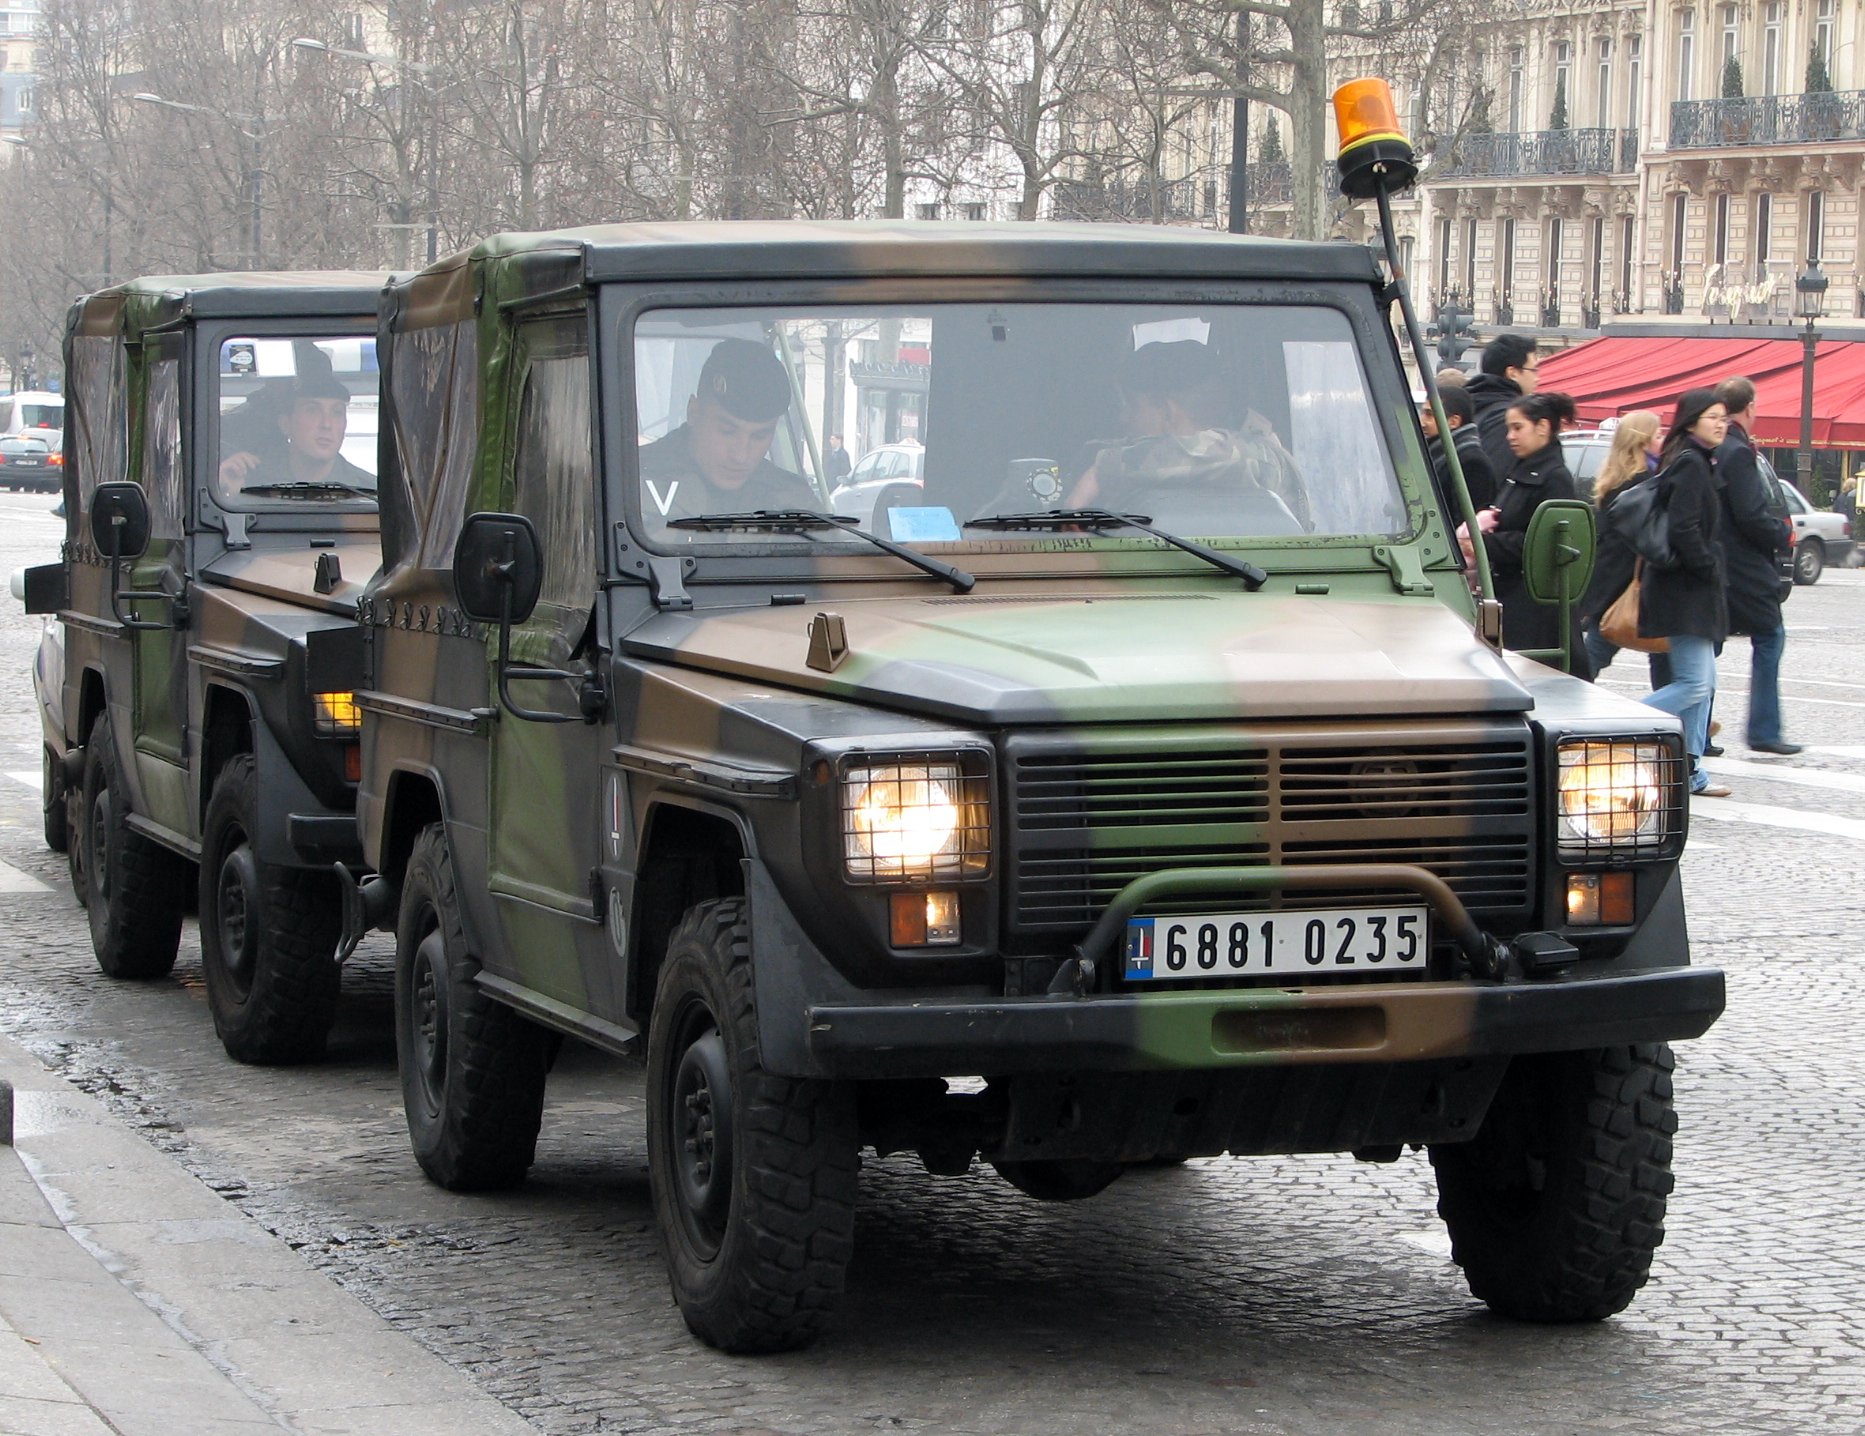 two military vehicles driving down the street with passengers in the back